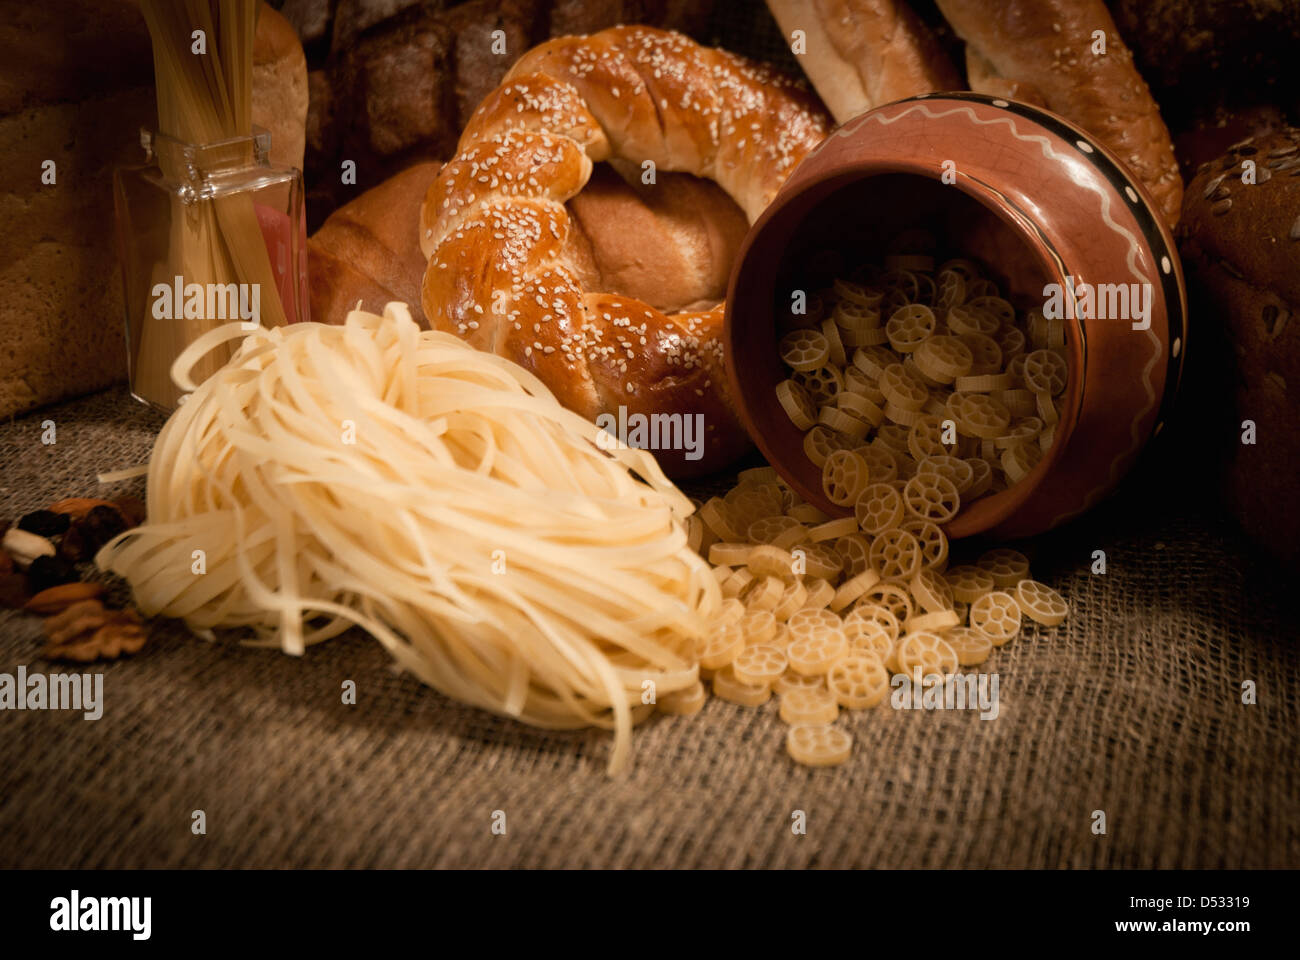 healthy meal with bread and cereals Stock Photo